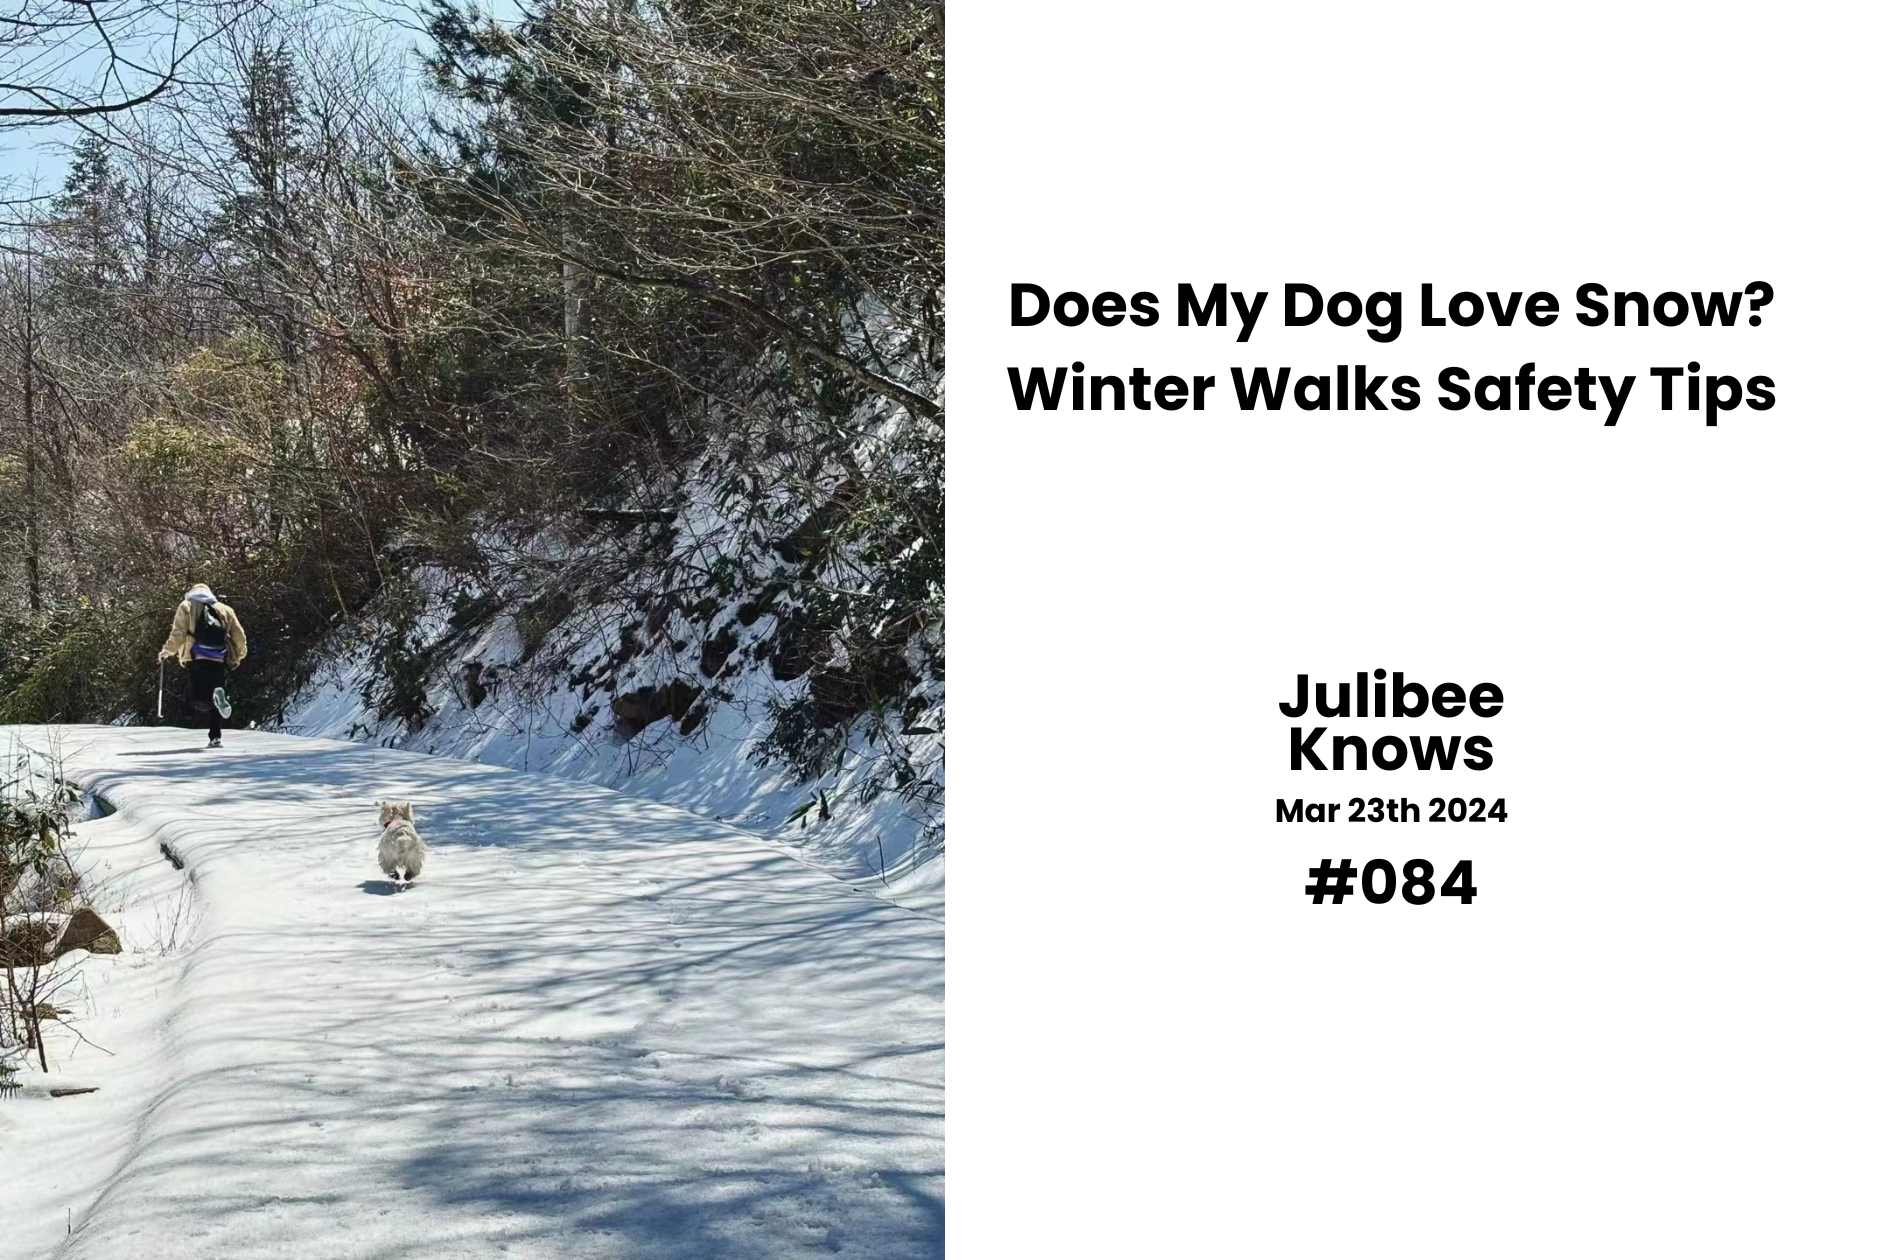 Does My Dog Love Snow? Winter Walks and Safety Tips